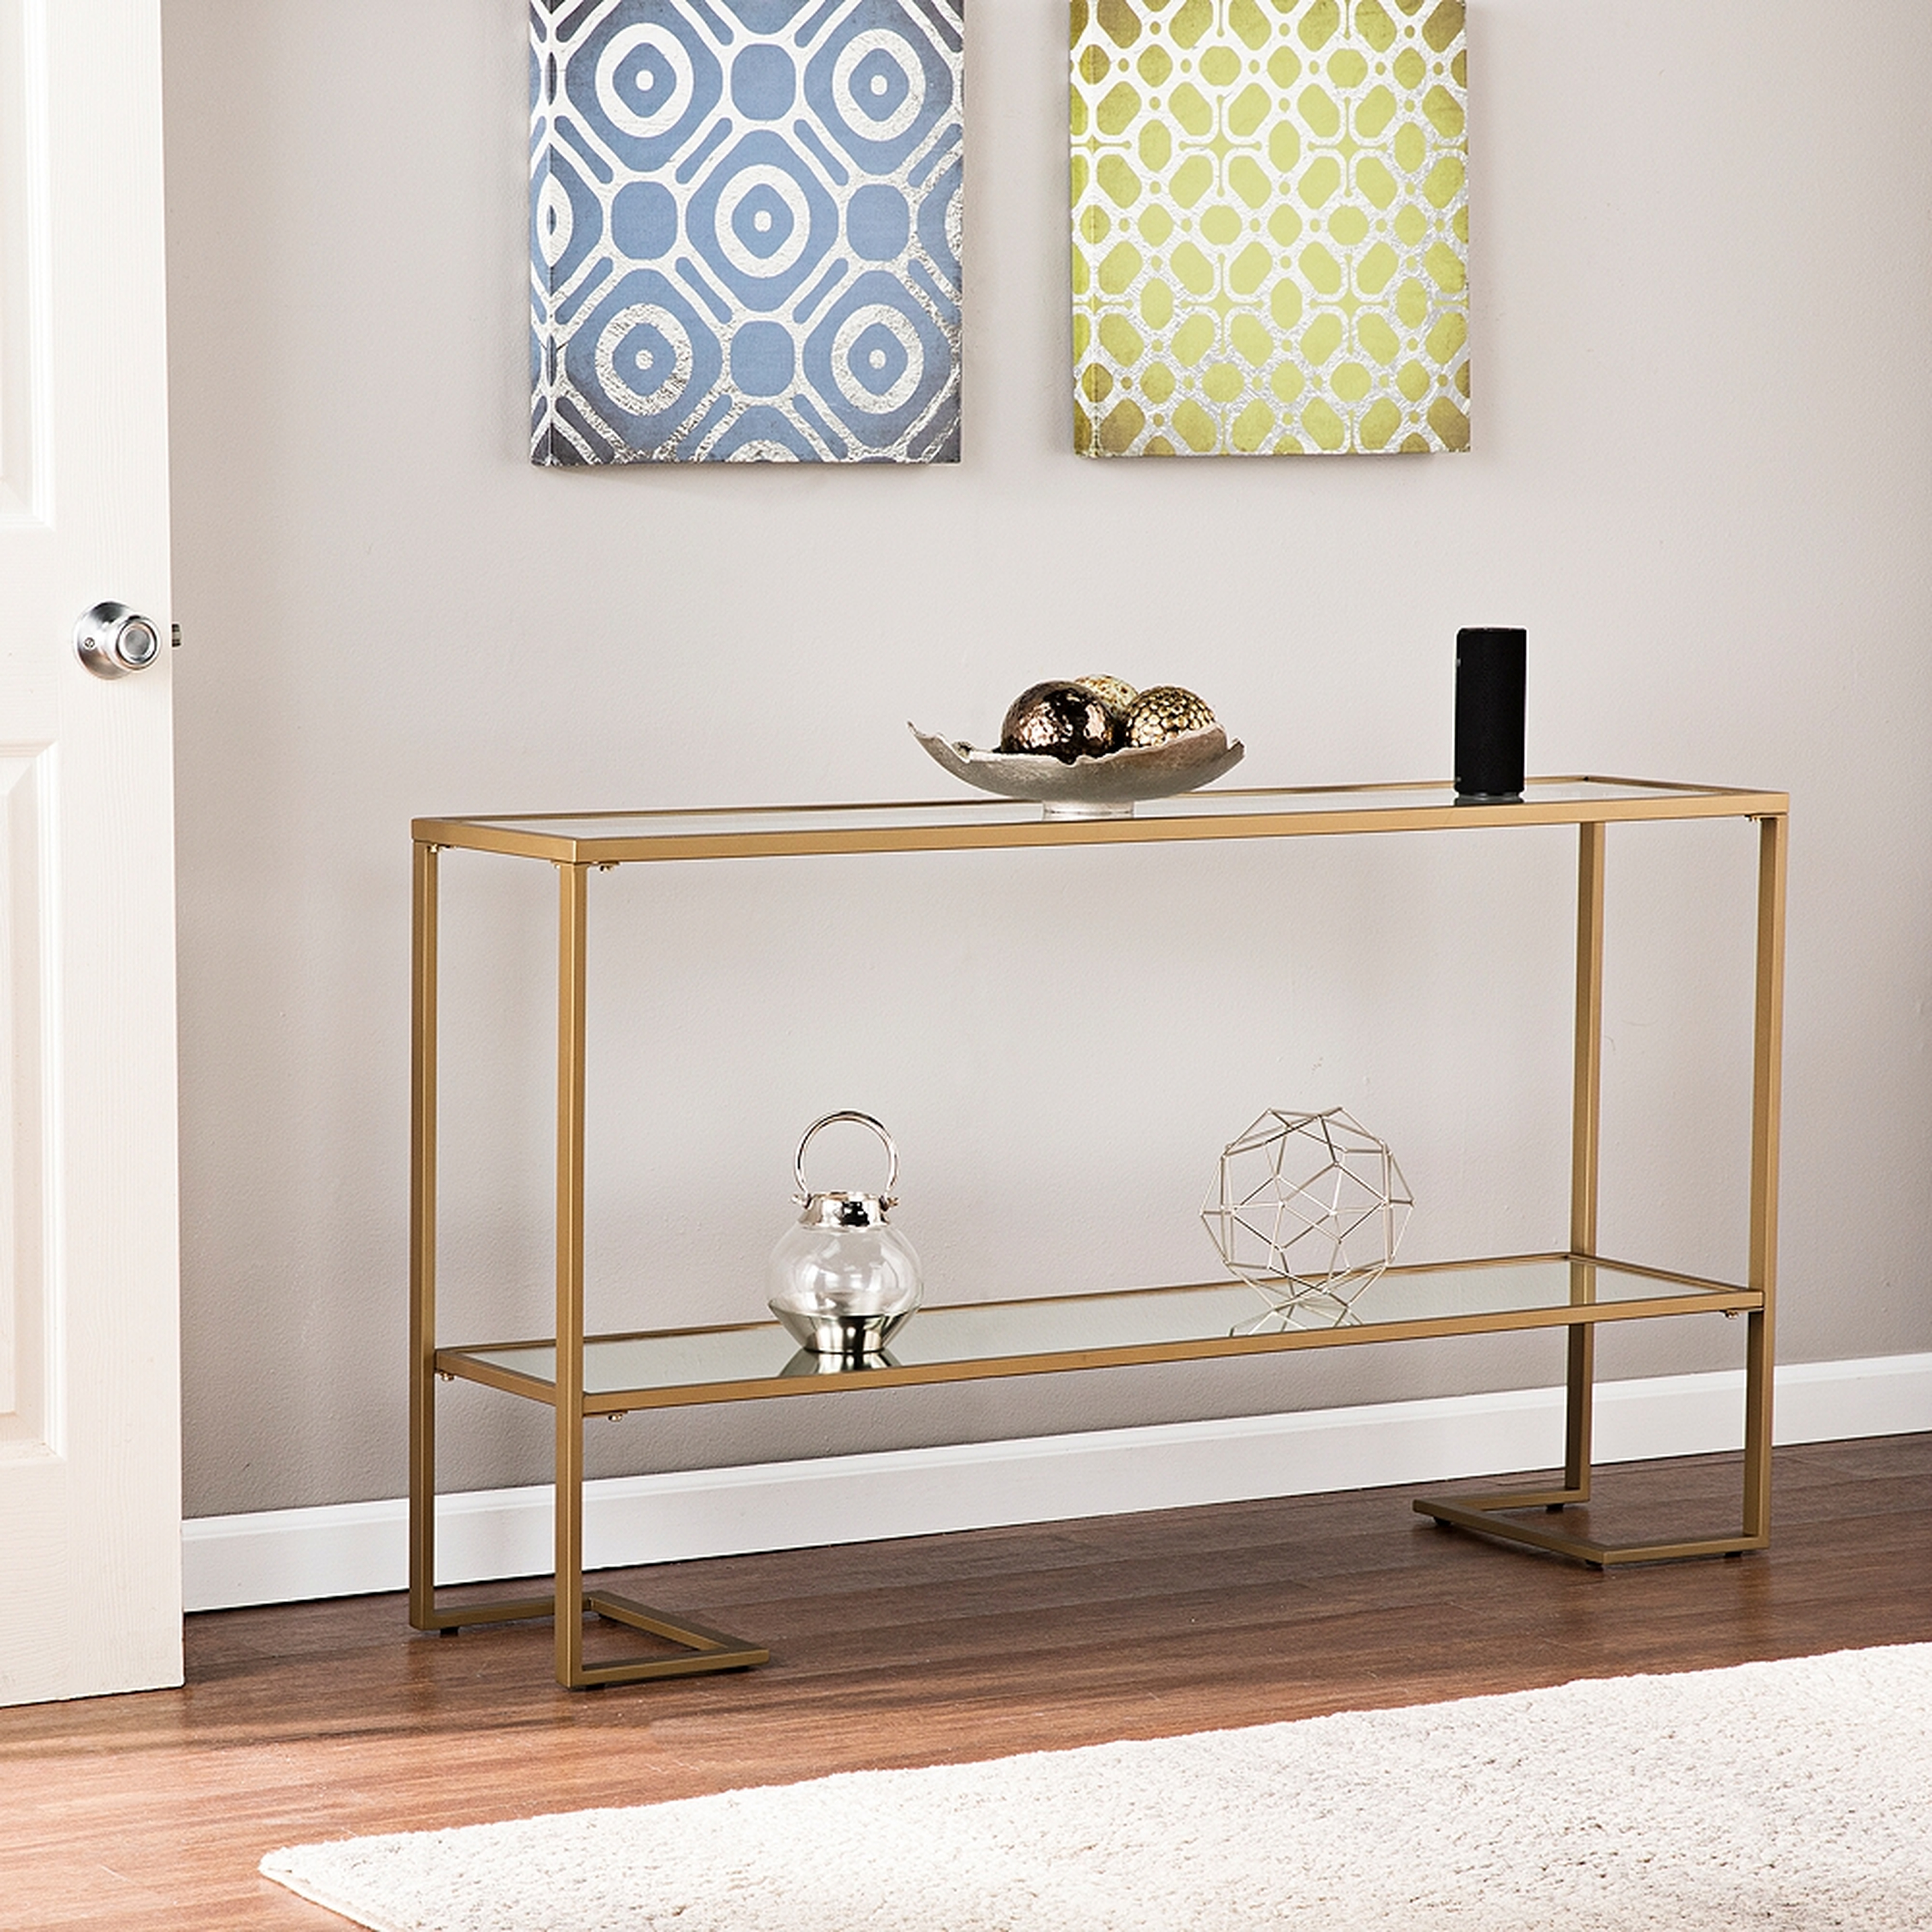 Horten Gold Narrow Console Table - Style # 39G51 - Lamps Plus